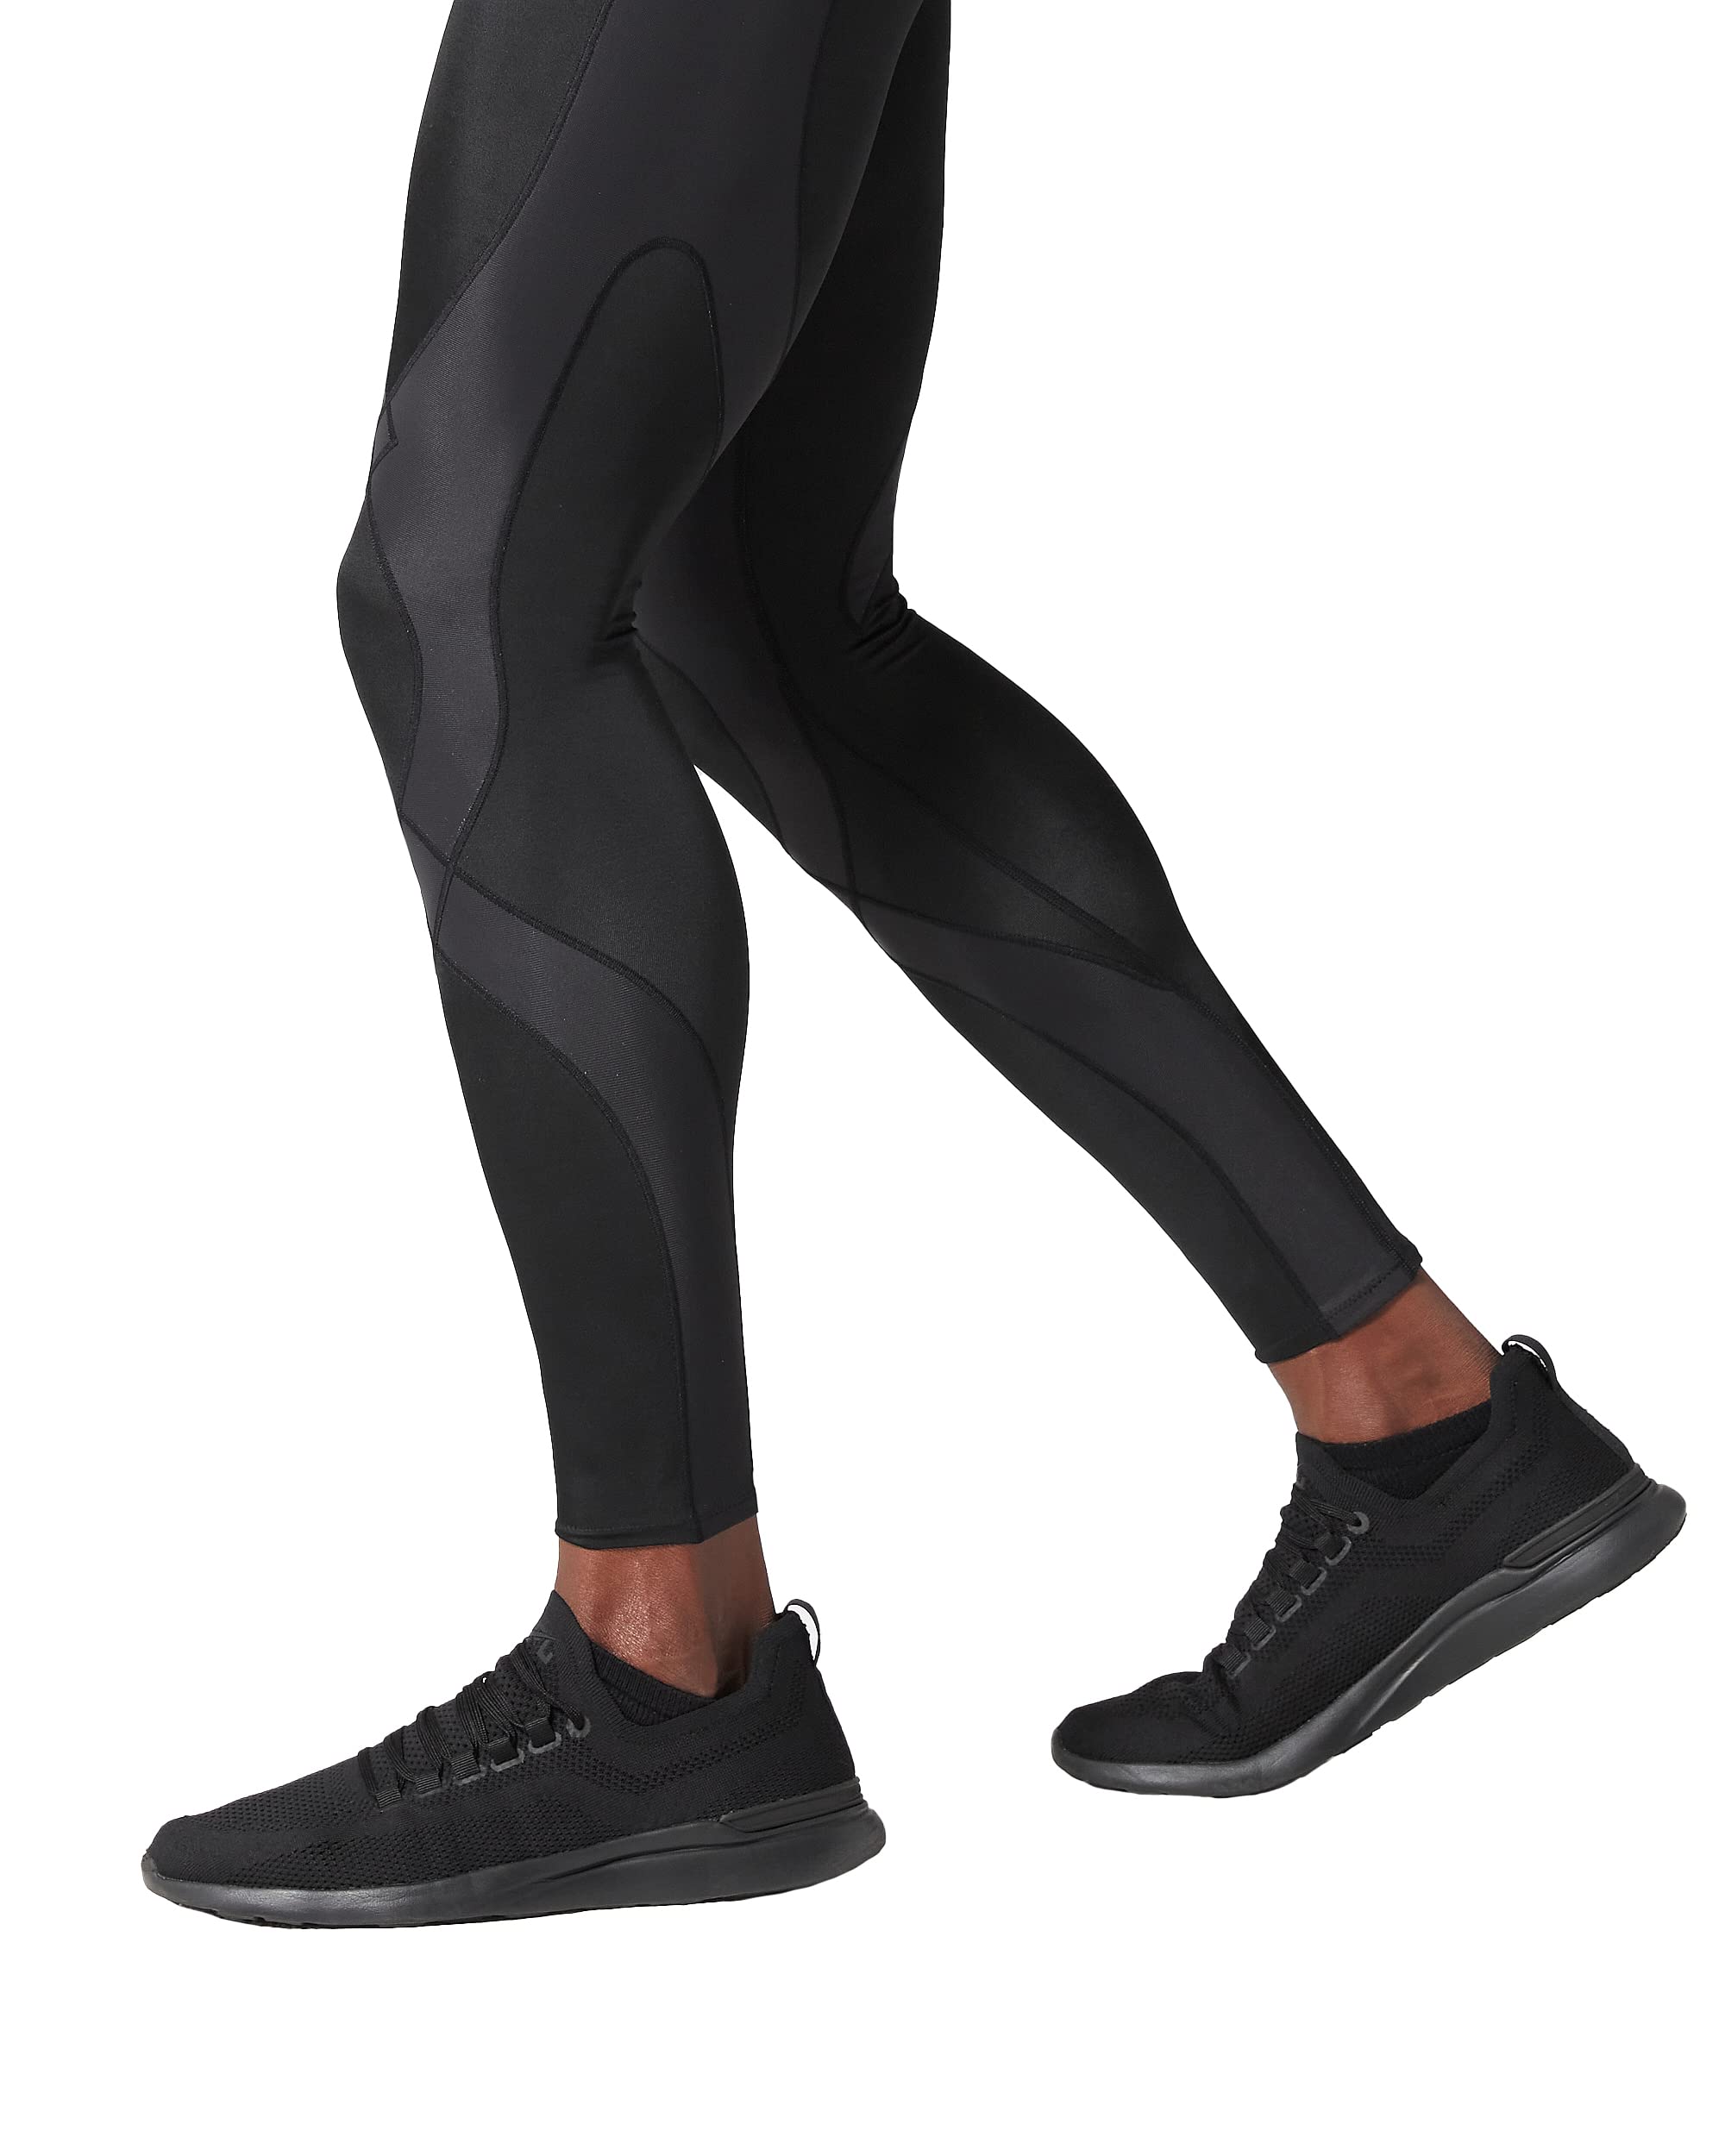 CW-X Men's Stabilyx Joint Support Compression Tights